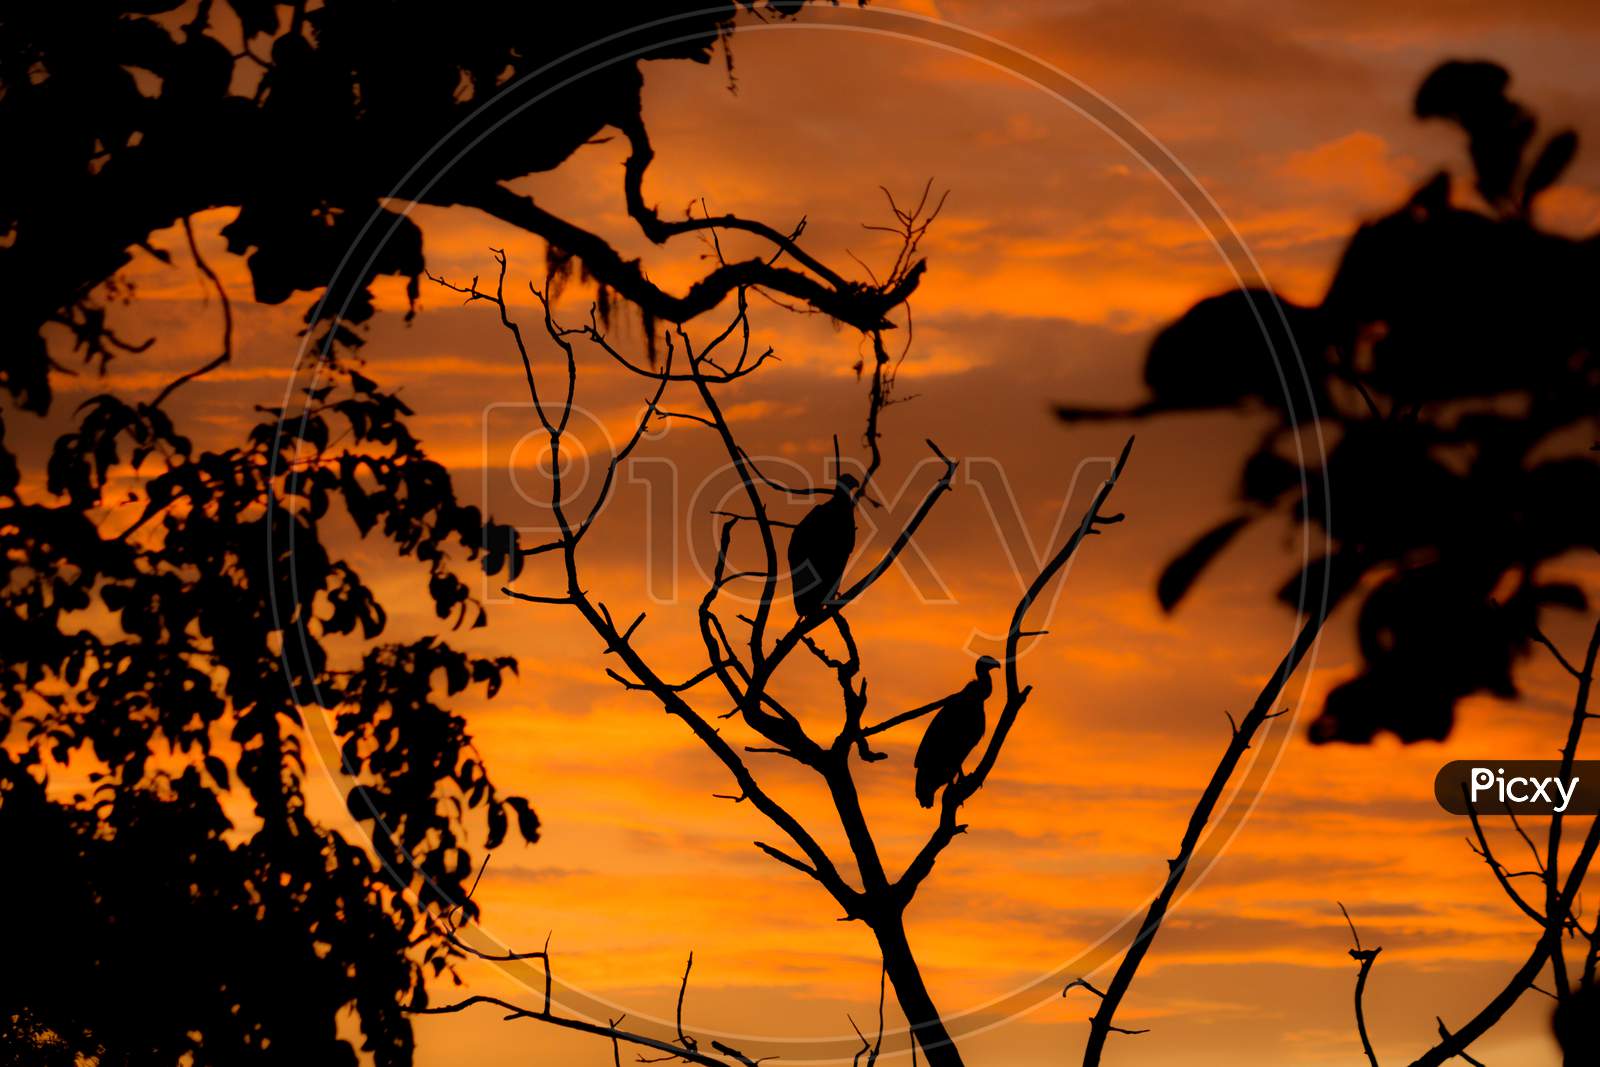 A Cute Silhouette Picture of Vultures resting on a Tree in the Evening Twilight against the Orange sky in Kabini Jungle near Mysuru in Karnataka/India.